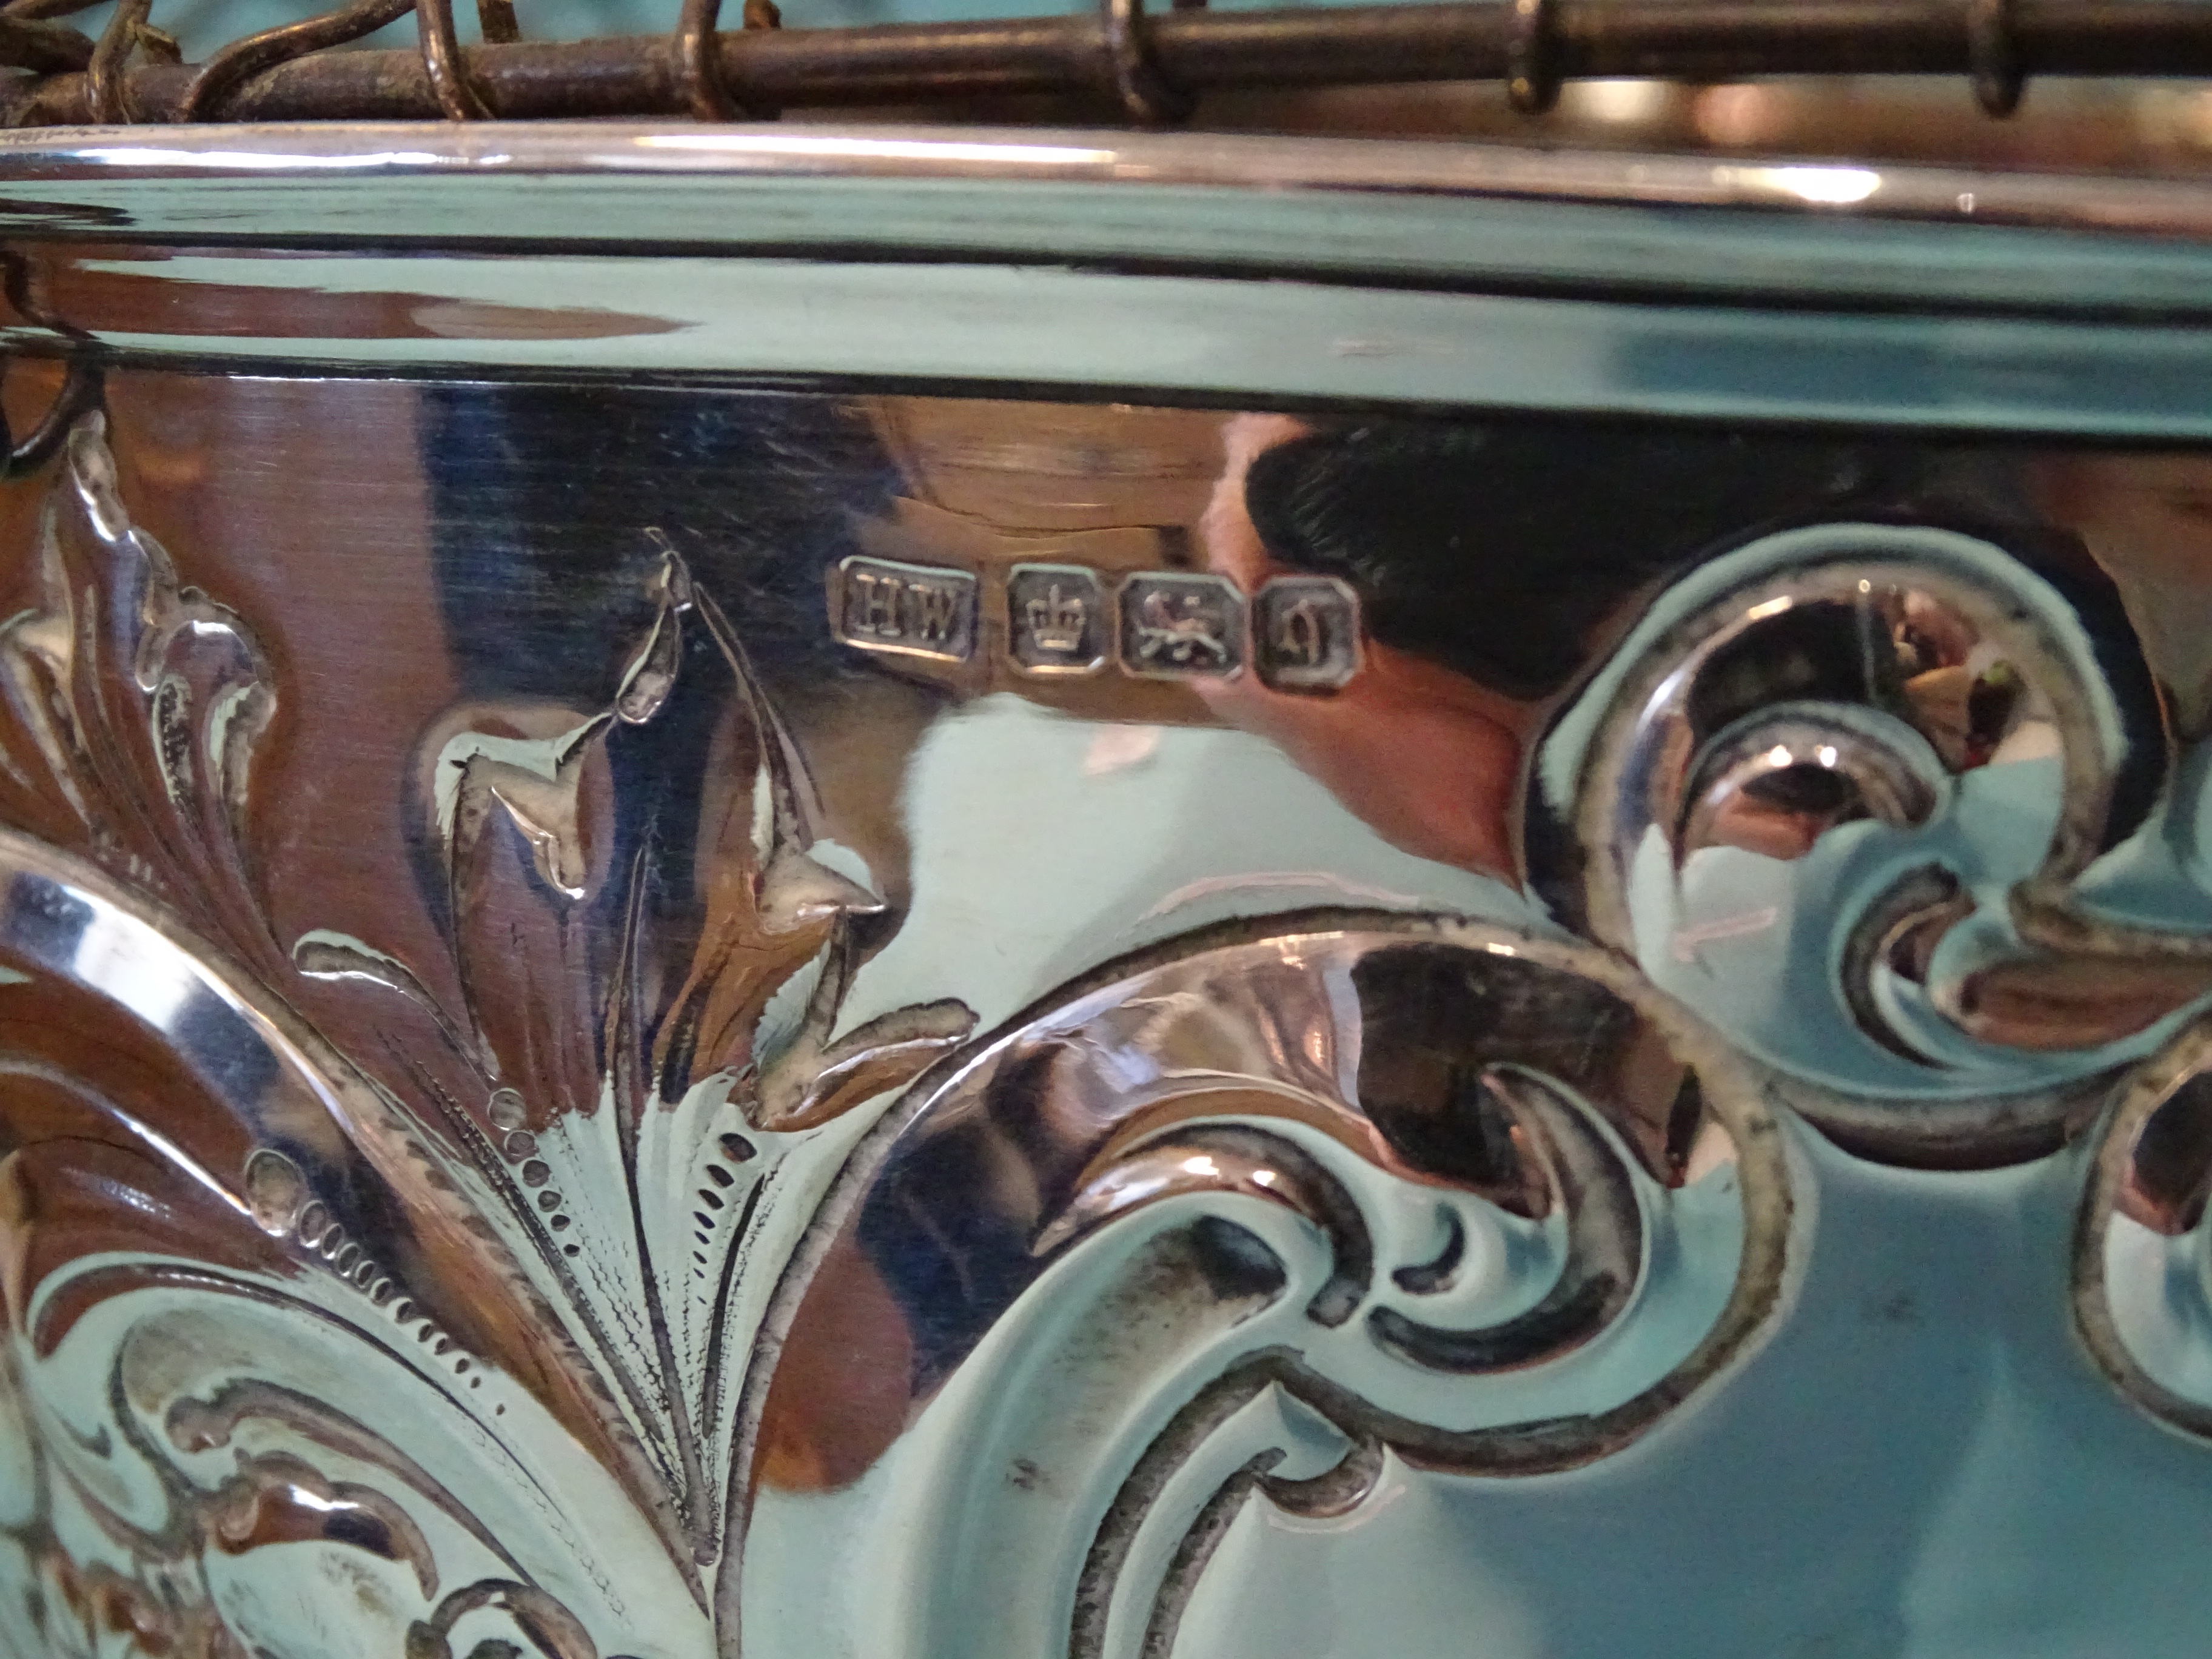 An Edwardian silver pedestal rose bowl with embossed flower and scroll decoration, maker Lee & - Image 4 of 4